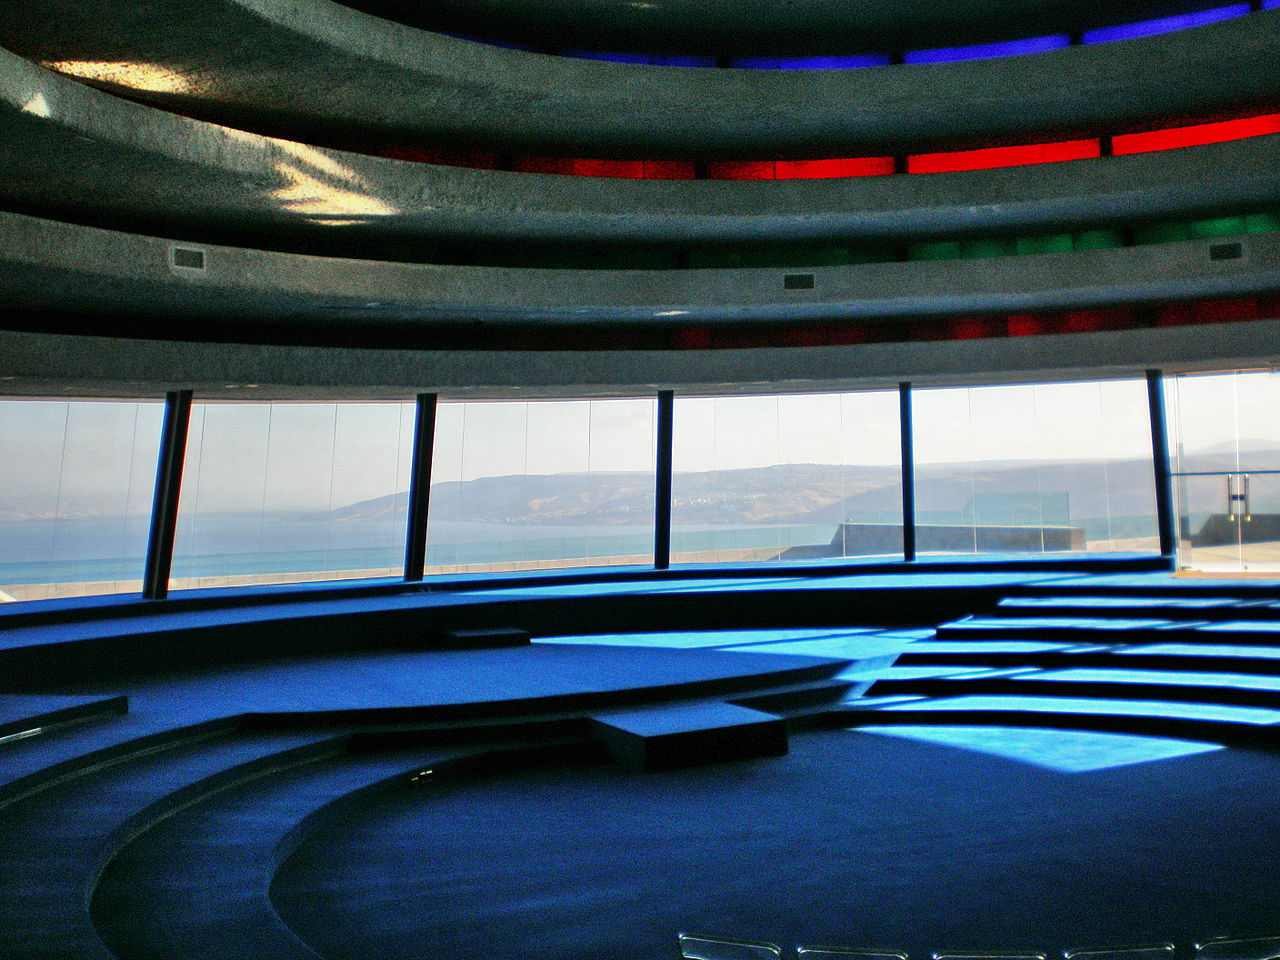 Domus Galilaeae meeting room with view of the Sea of Galilee (or Lake of Gennesaret)